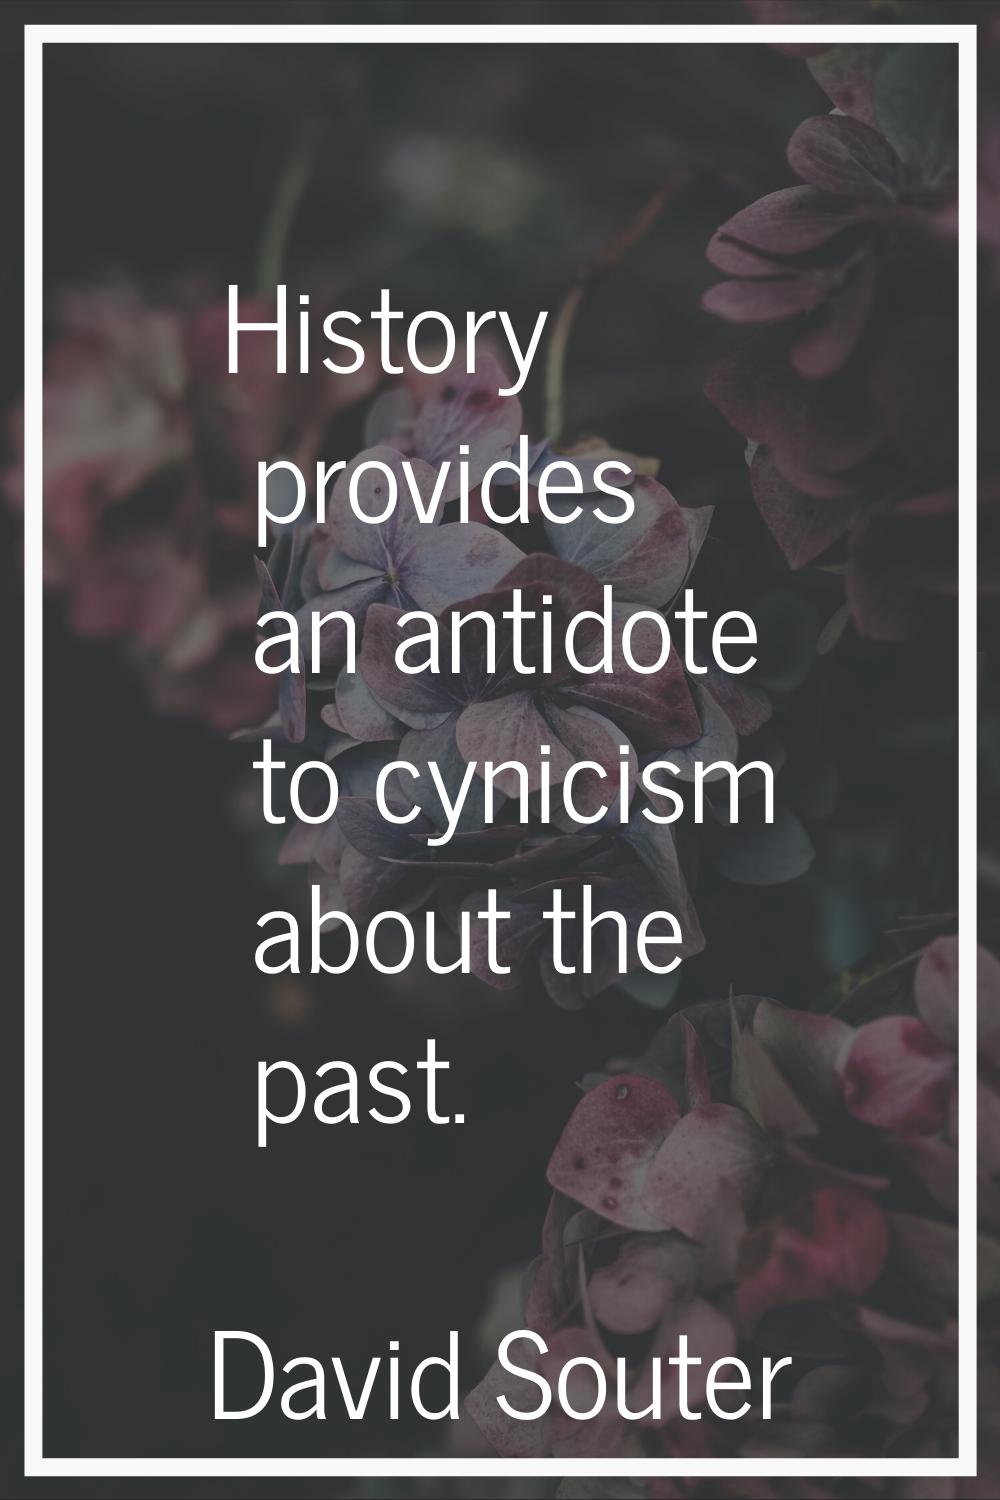 History provides an antidote to cynicism about the past.